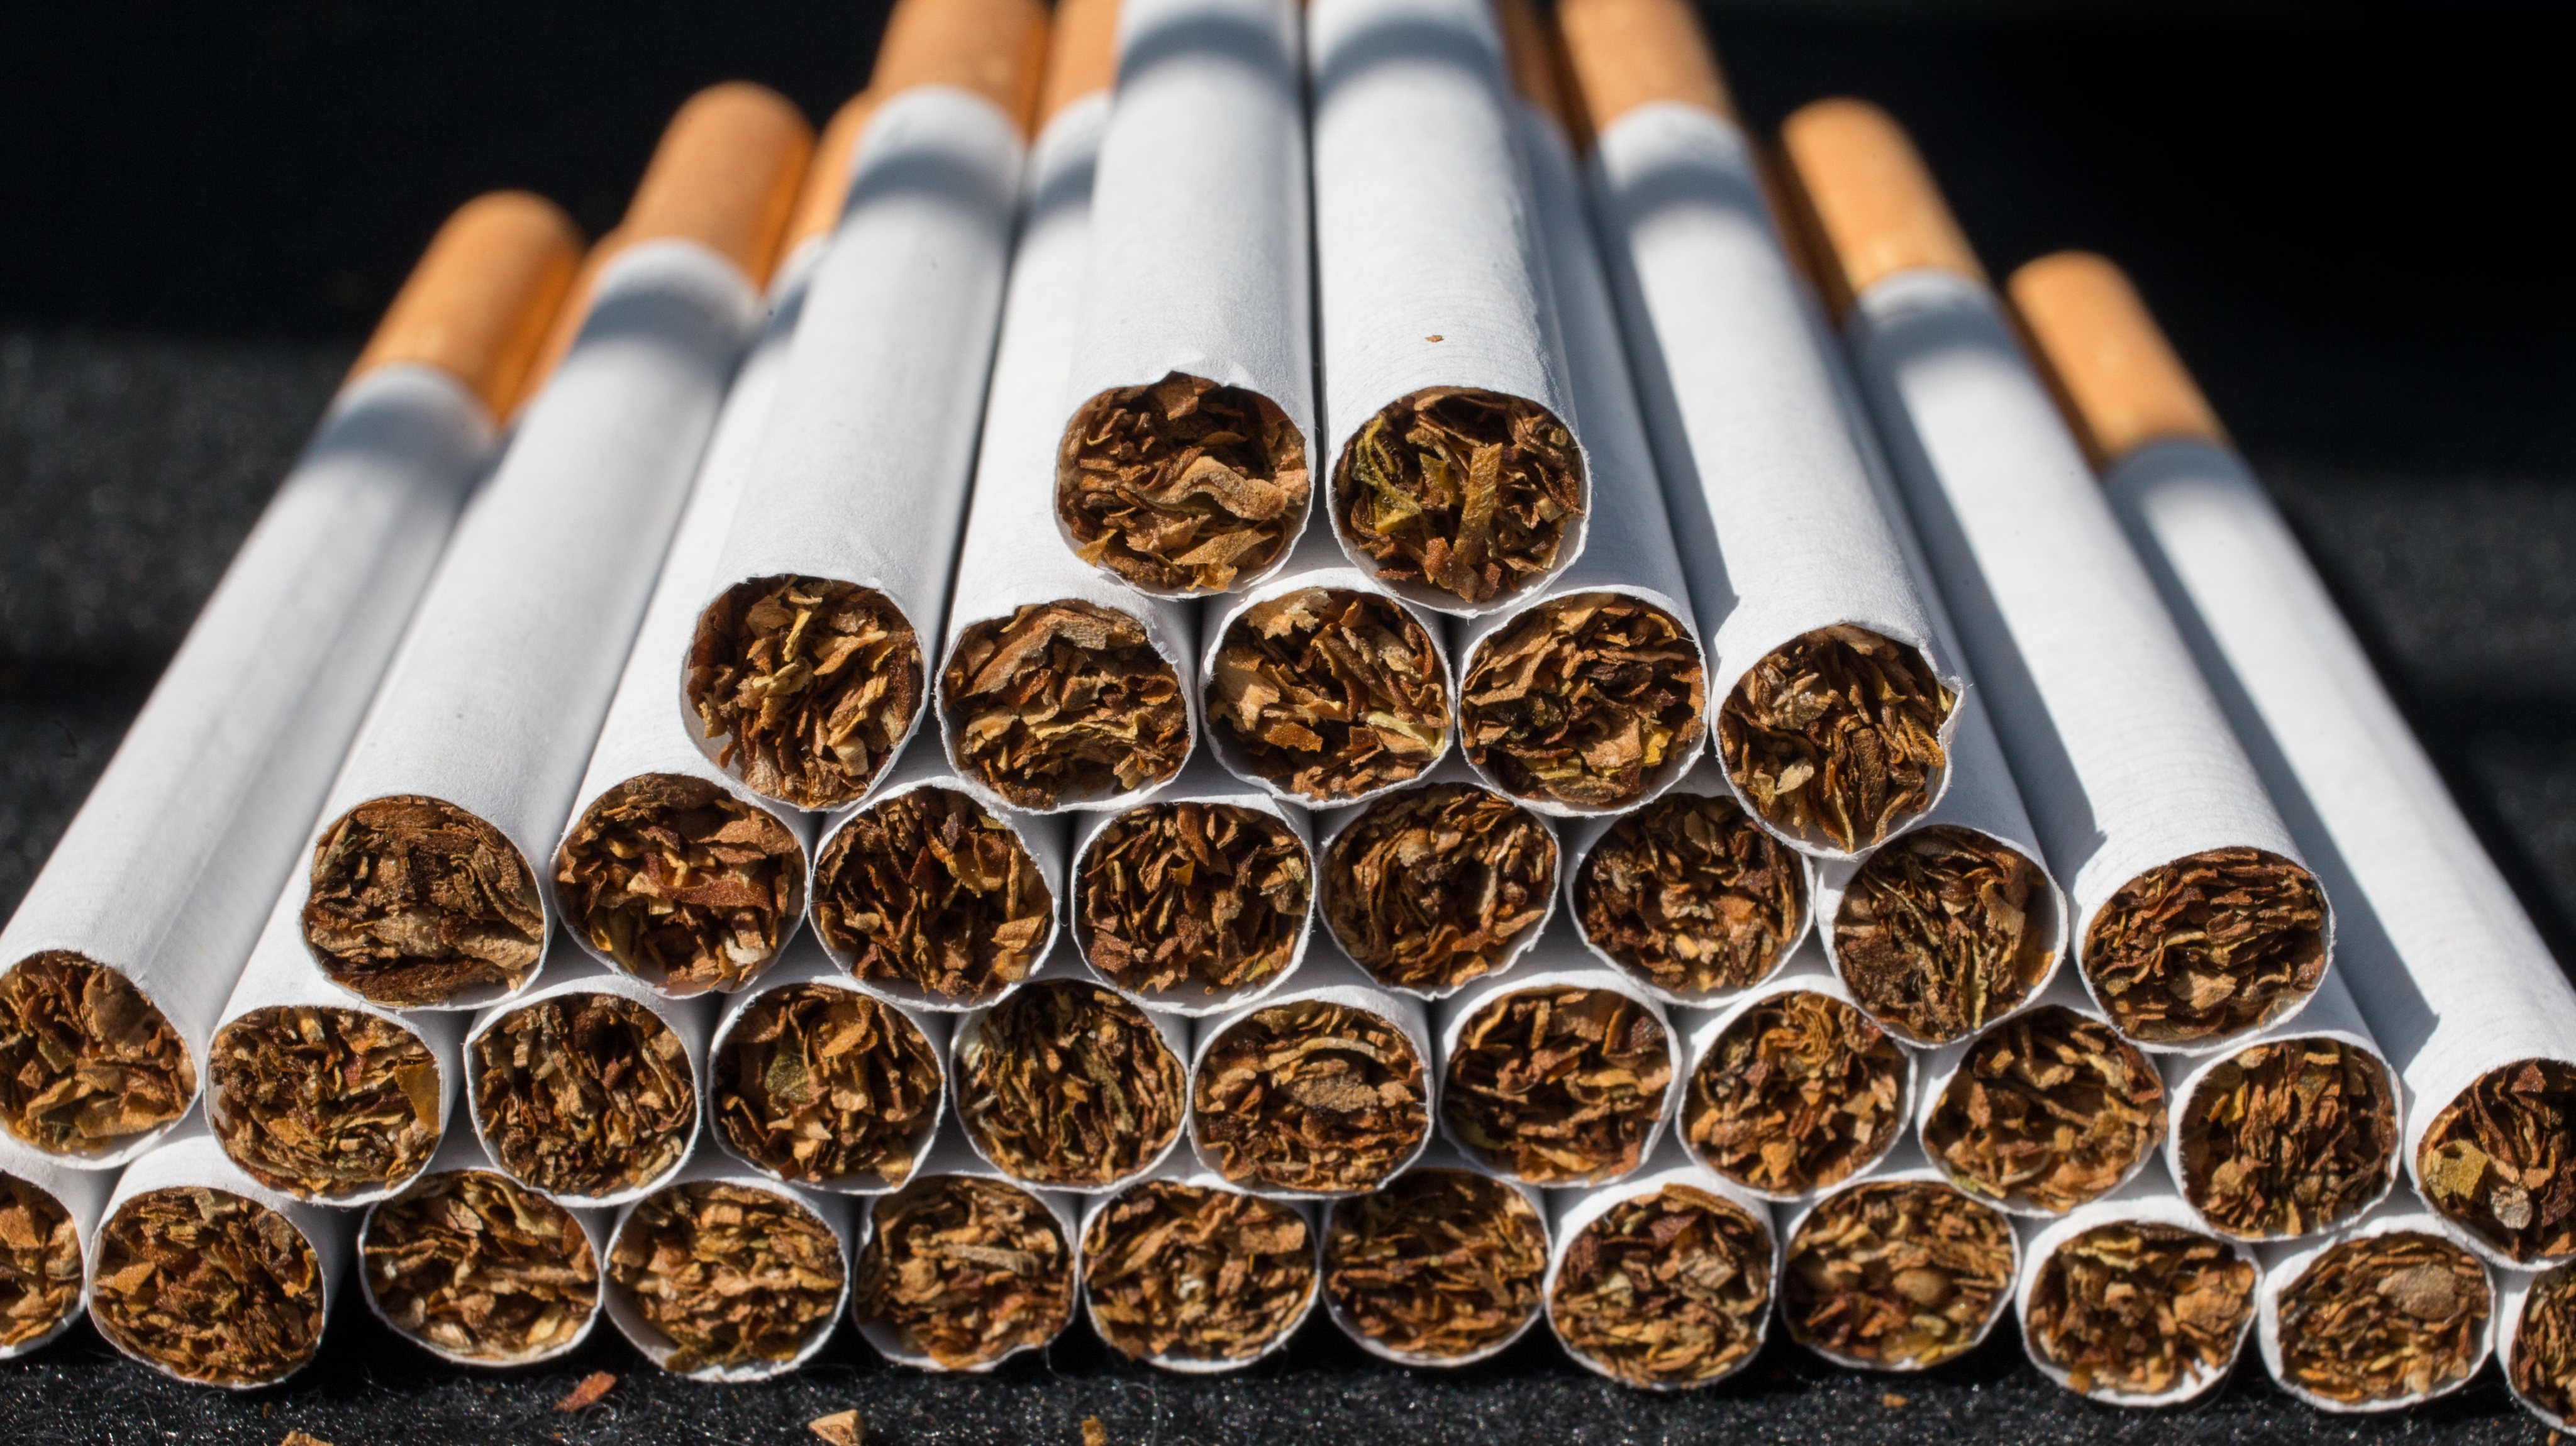 Health Campaigners Call For A Tobacco Levy To Help Smokers Quit